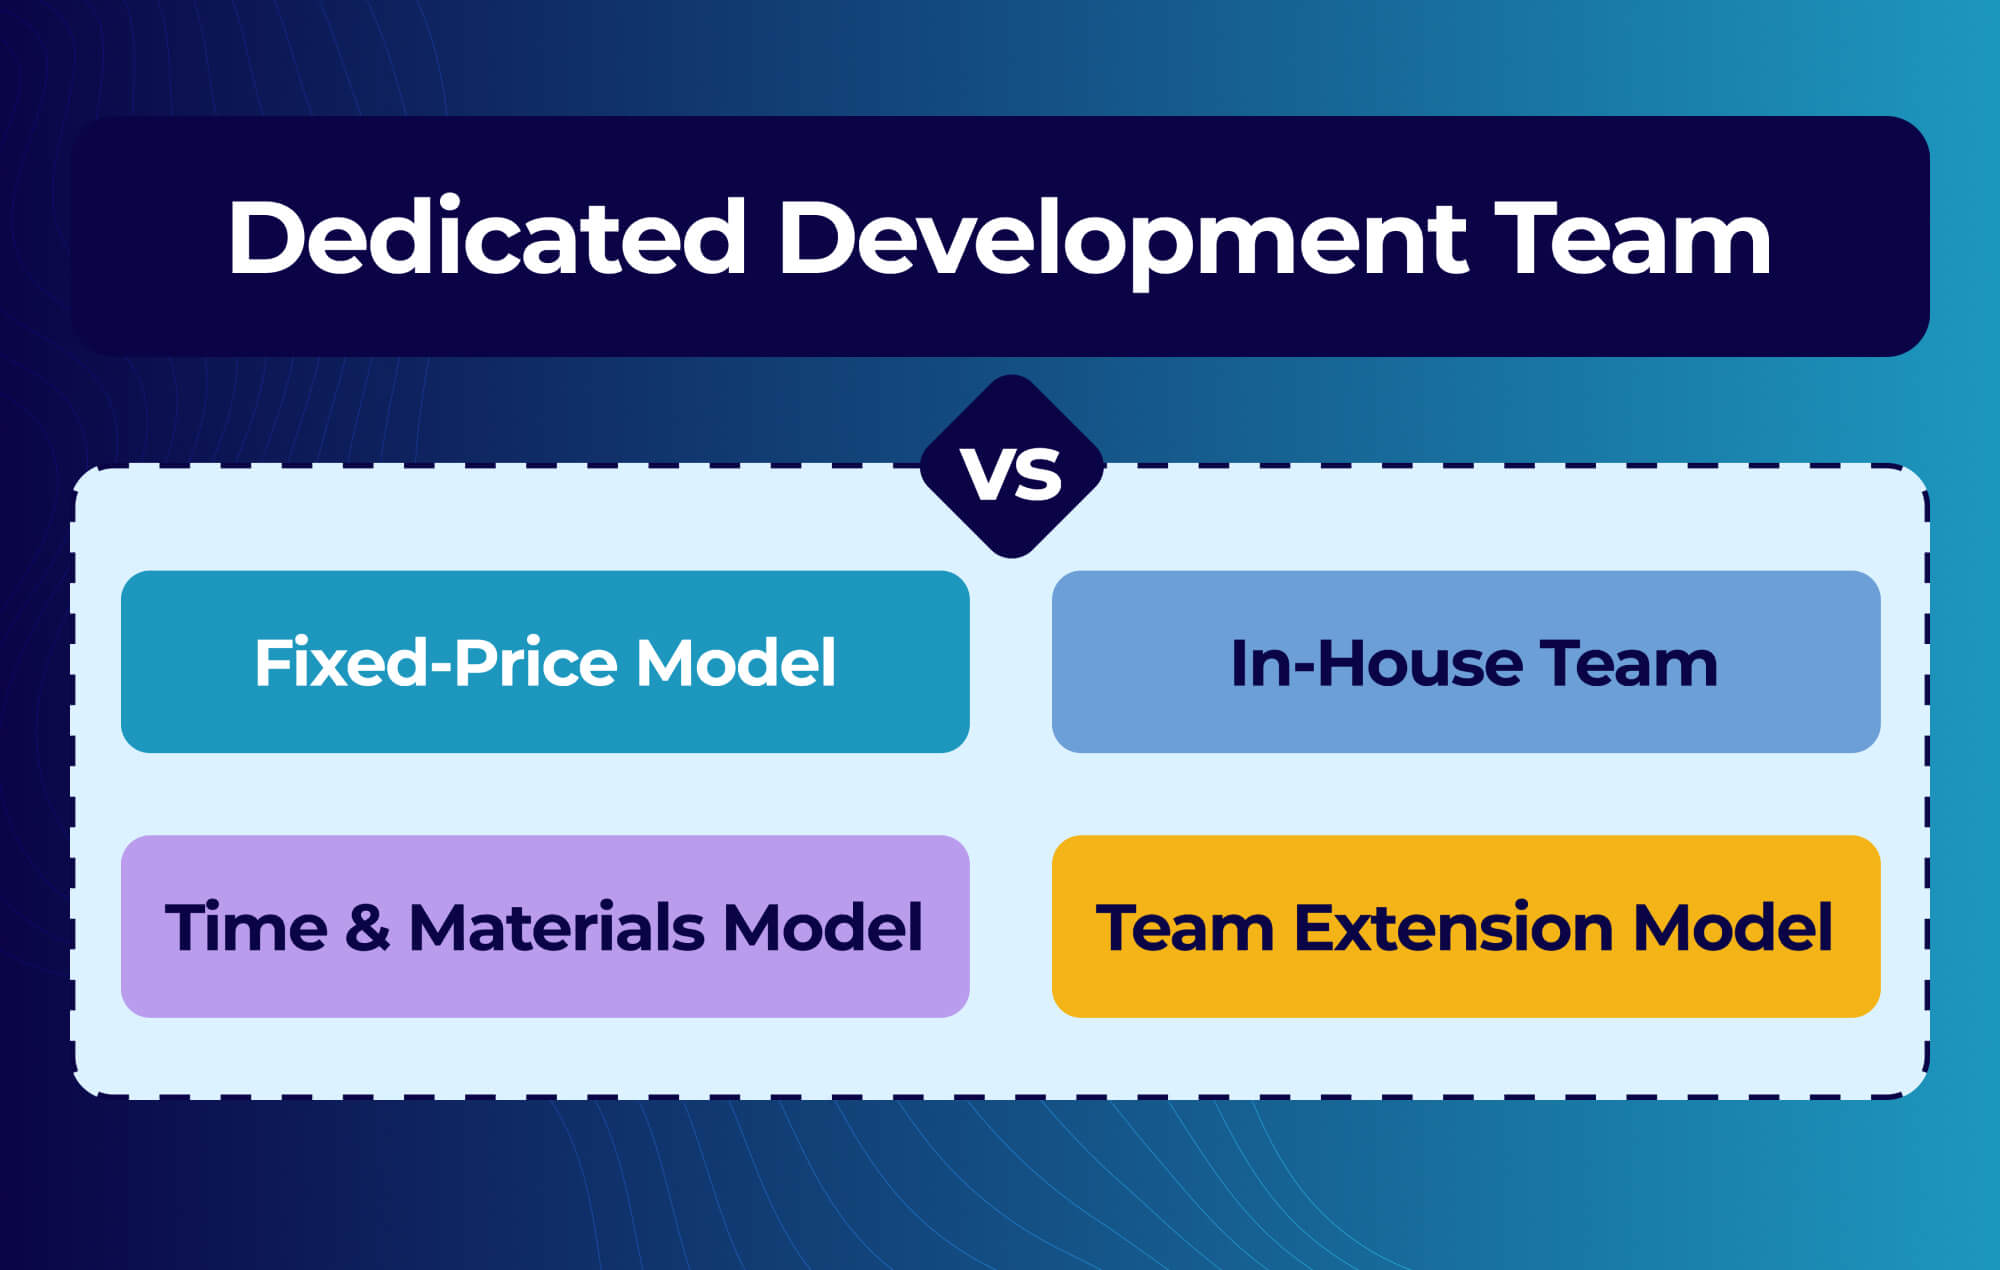 Ideamaker - Comparison of Dedicated Development Model With Other Models